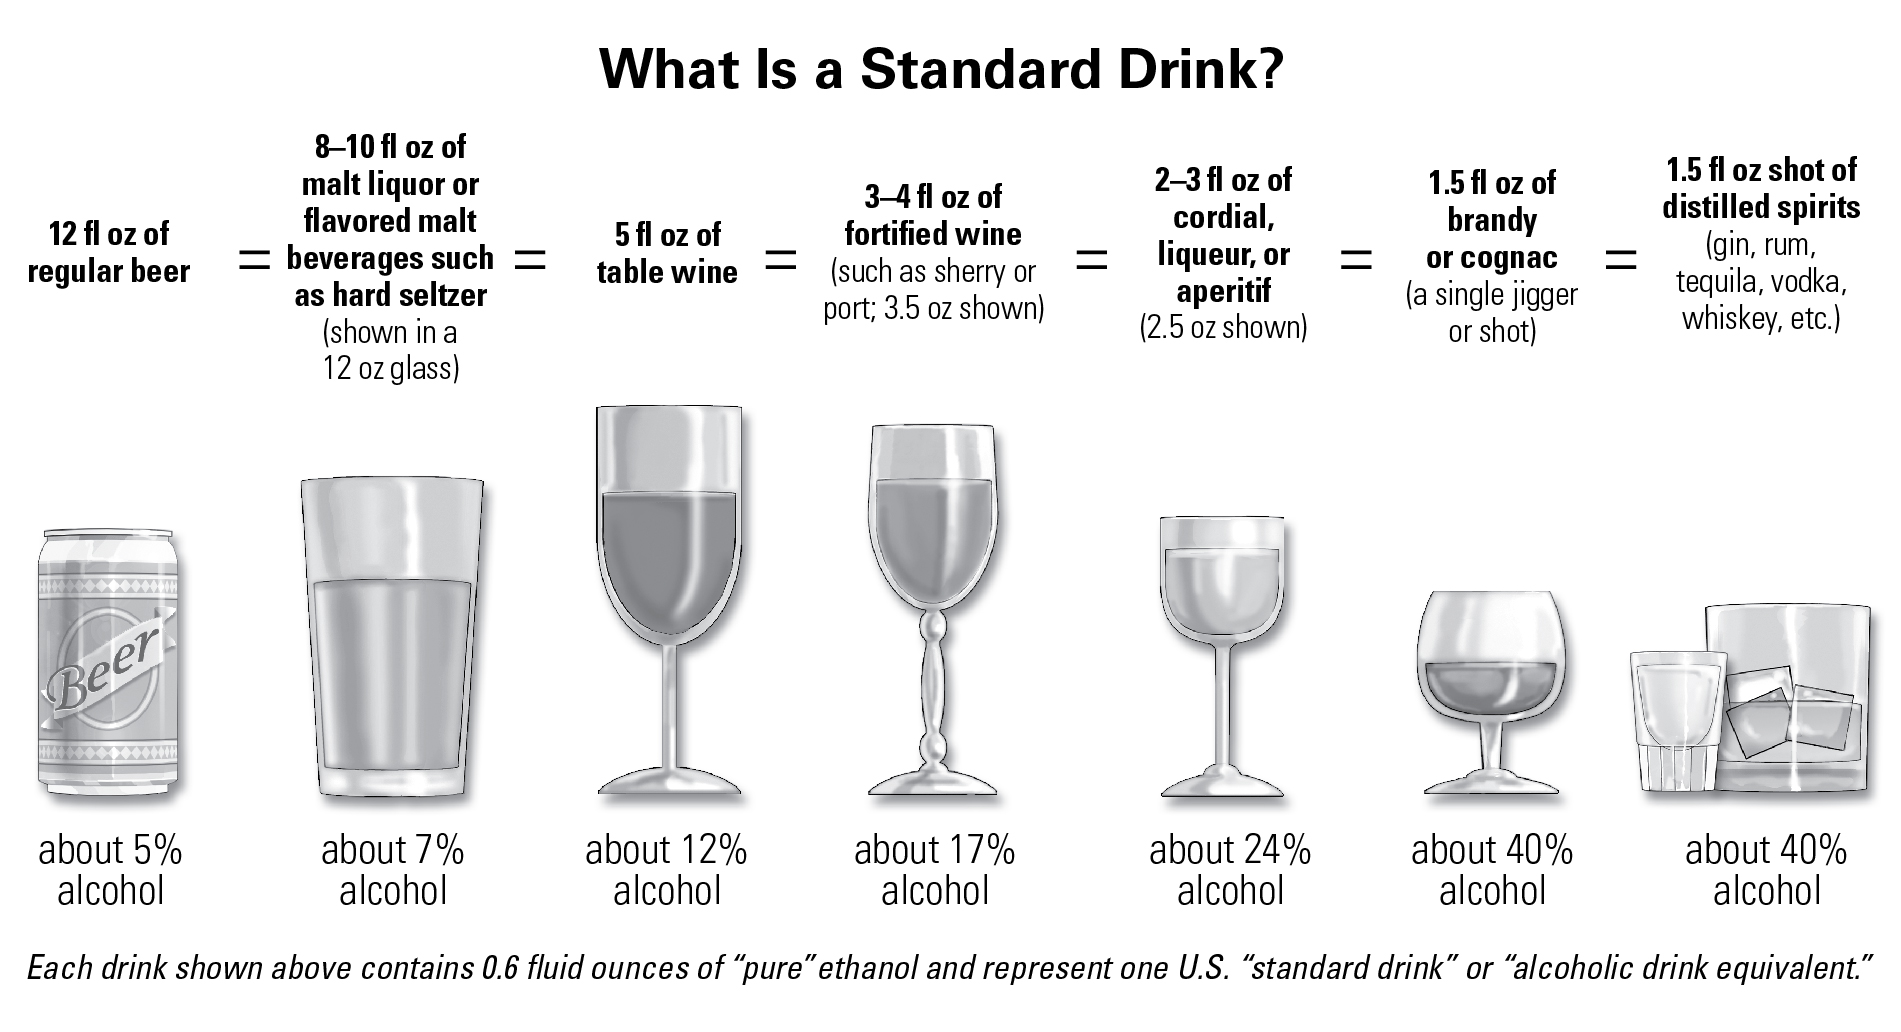 The percent of pure alcohol shown here as alcohol by vovumn, varies by beverage.